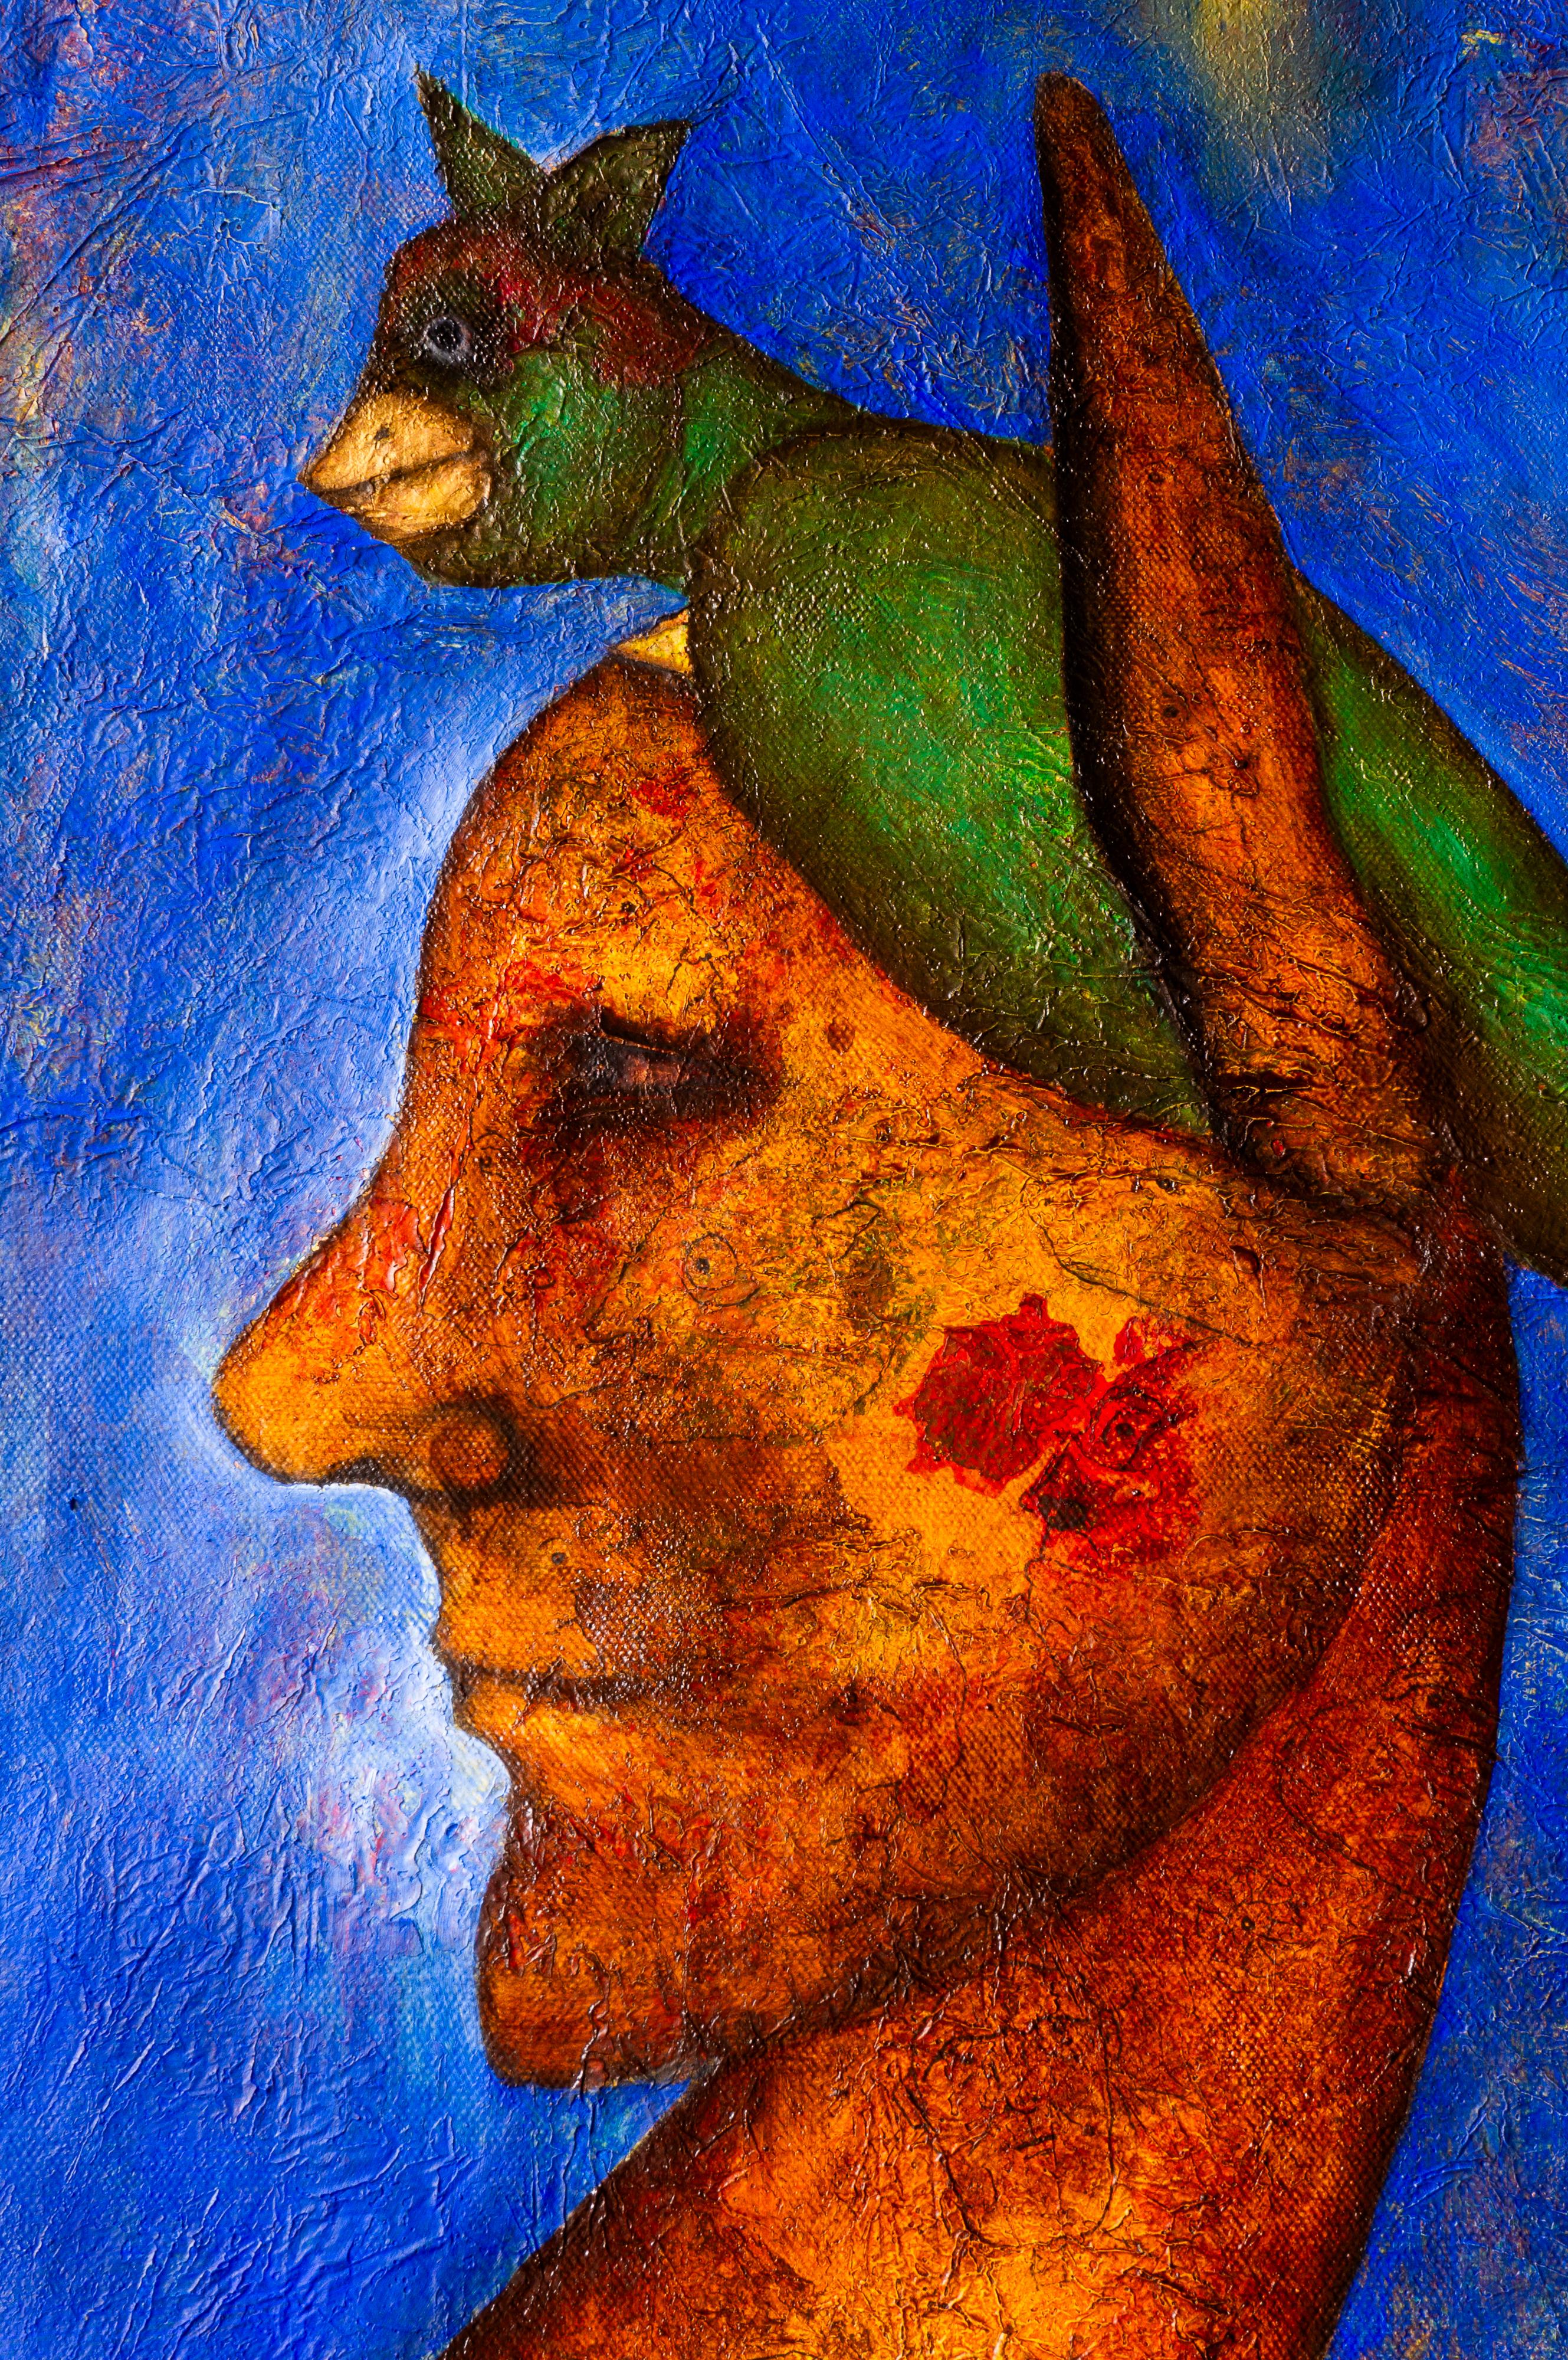 SURREAL Figurative Painting “Night in the Andes” in blue tones, mixed texture For Sale 1